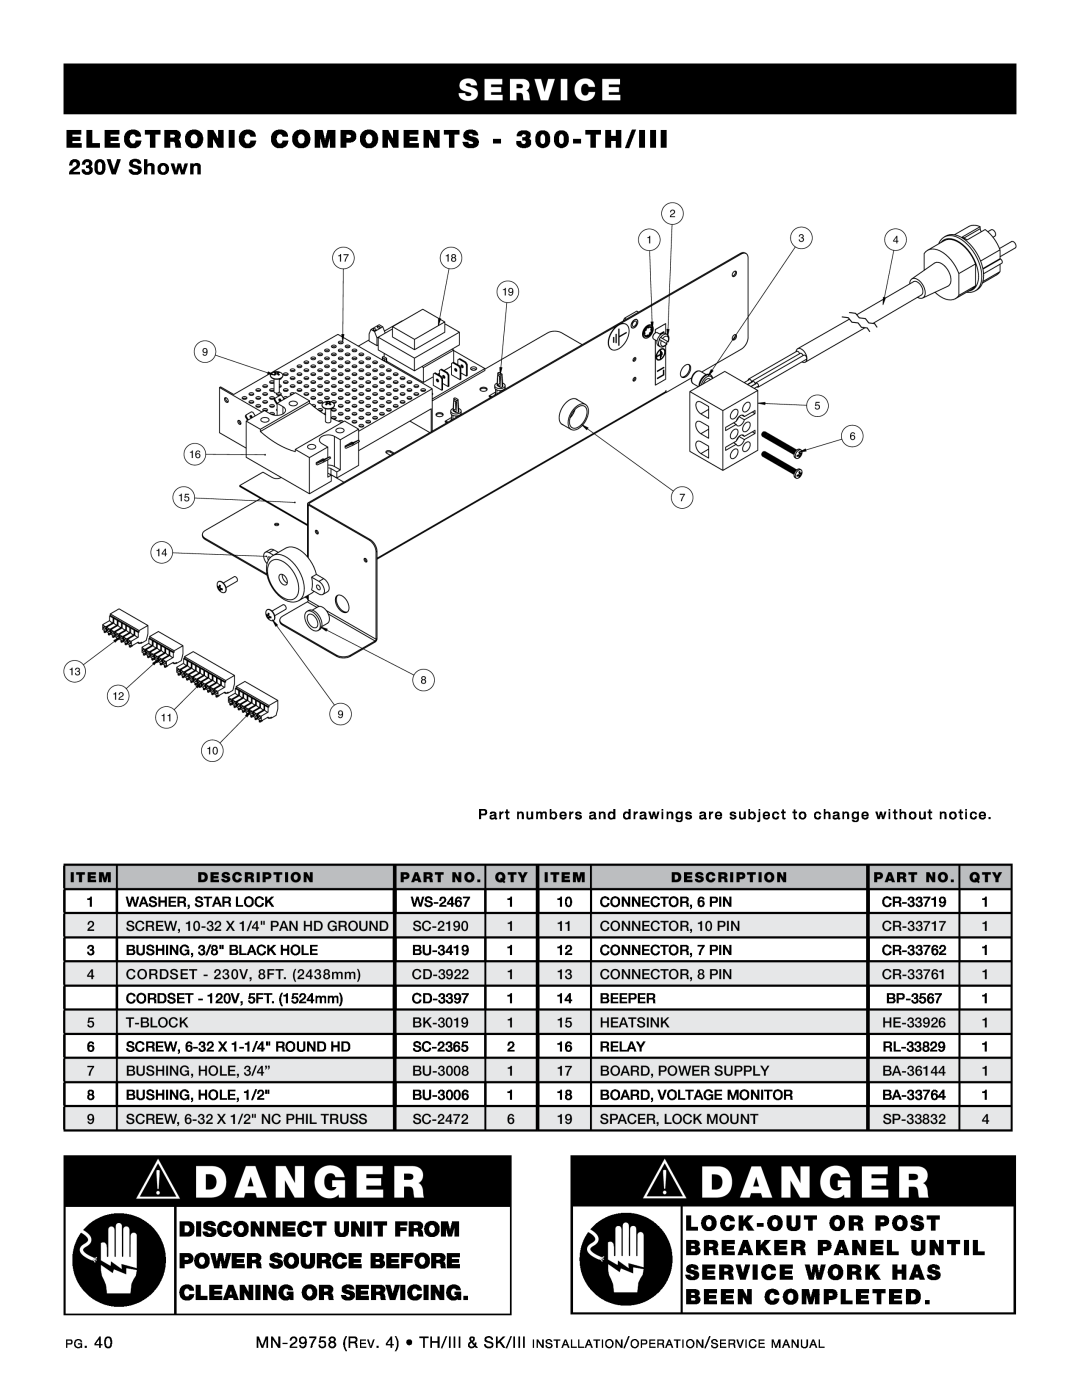 Alto-Shaam 750-TH/III manual dANgER, Se r v ice, ELECTRONIC COMPONENTS - 300-TH/III, 230V Shown, cLEANINg OR SERVIcINg 